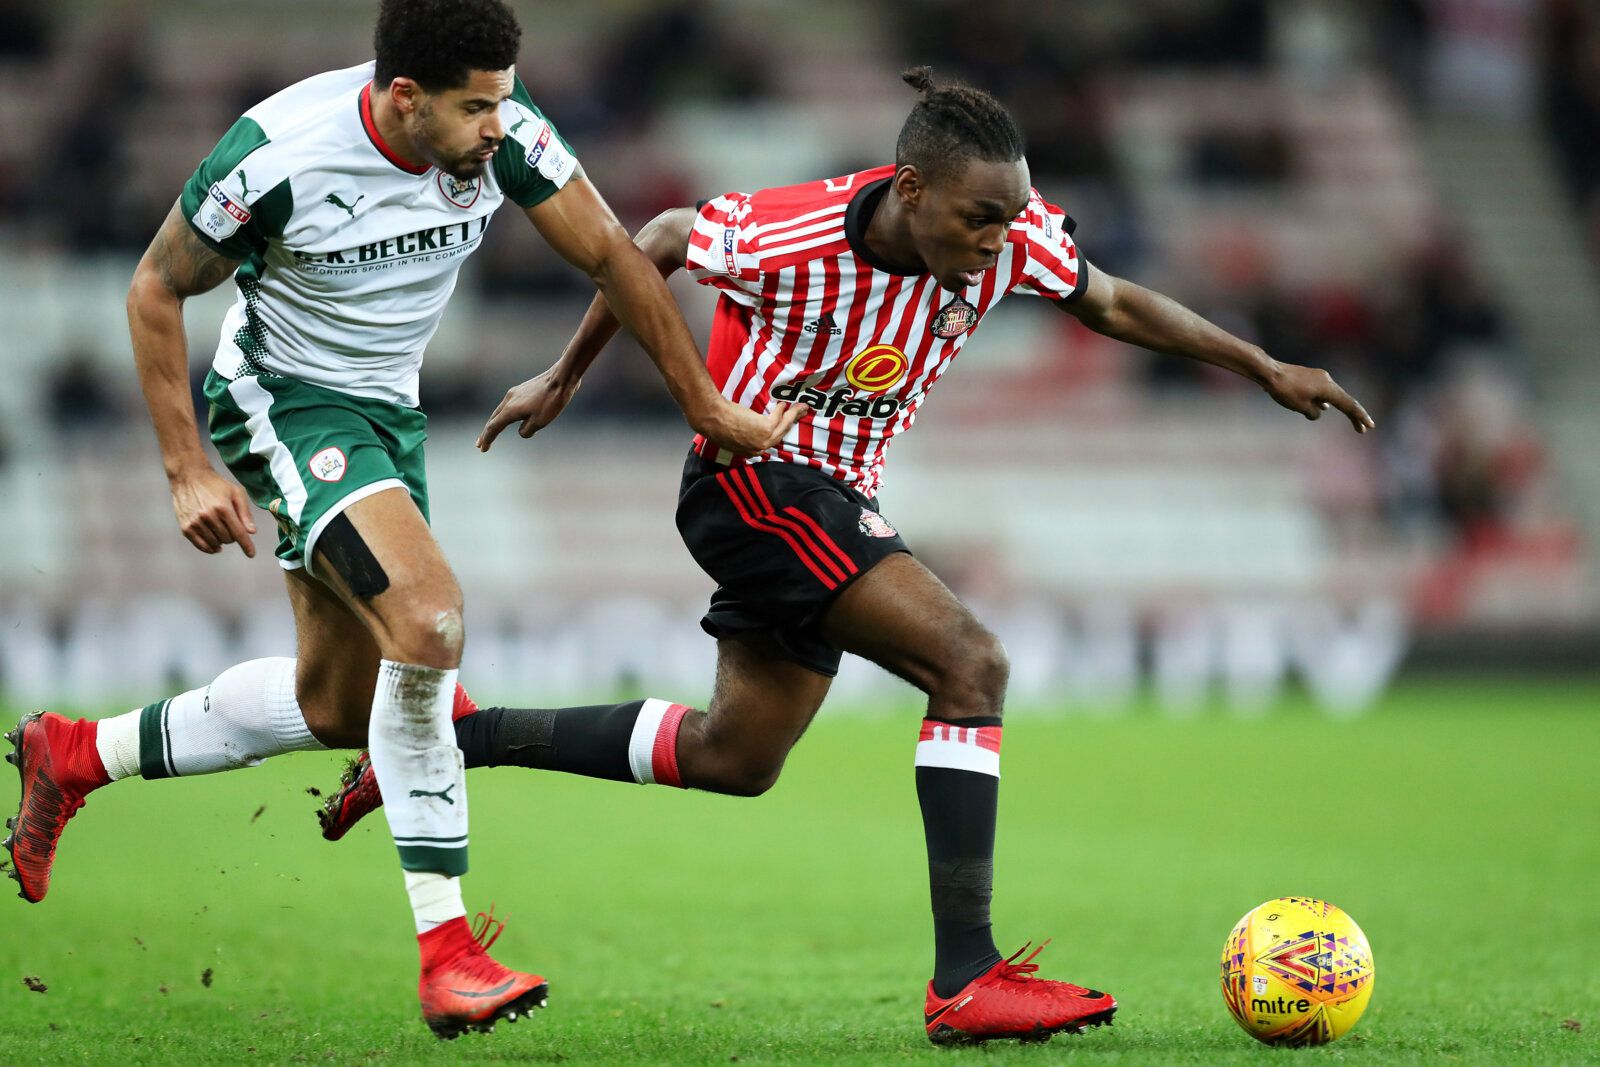 Soccer Football - Championship - Sunderland vs Barnsley - Stadium of Light, Sunderland, Britain - January 1, 2018   Sunderland’s Joel Asoro in action with Barnsley’s Ezekiel Fryers   Action Images/John Clifton    EDITORIAL USE ONLY. No use with unauthorized audio, video, data, fixture lists, club/league logos or 